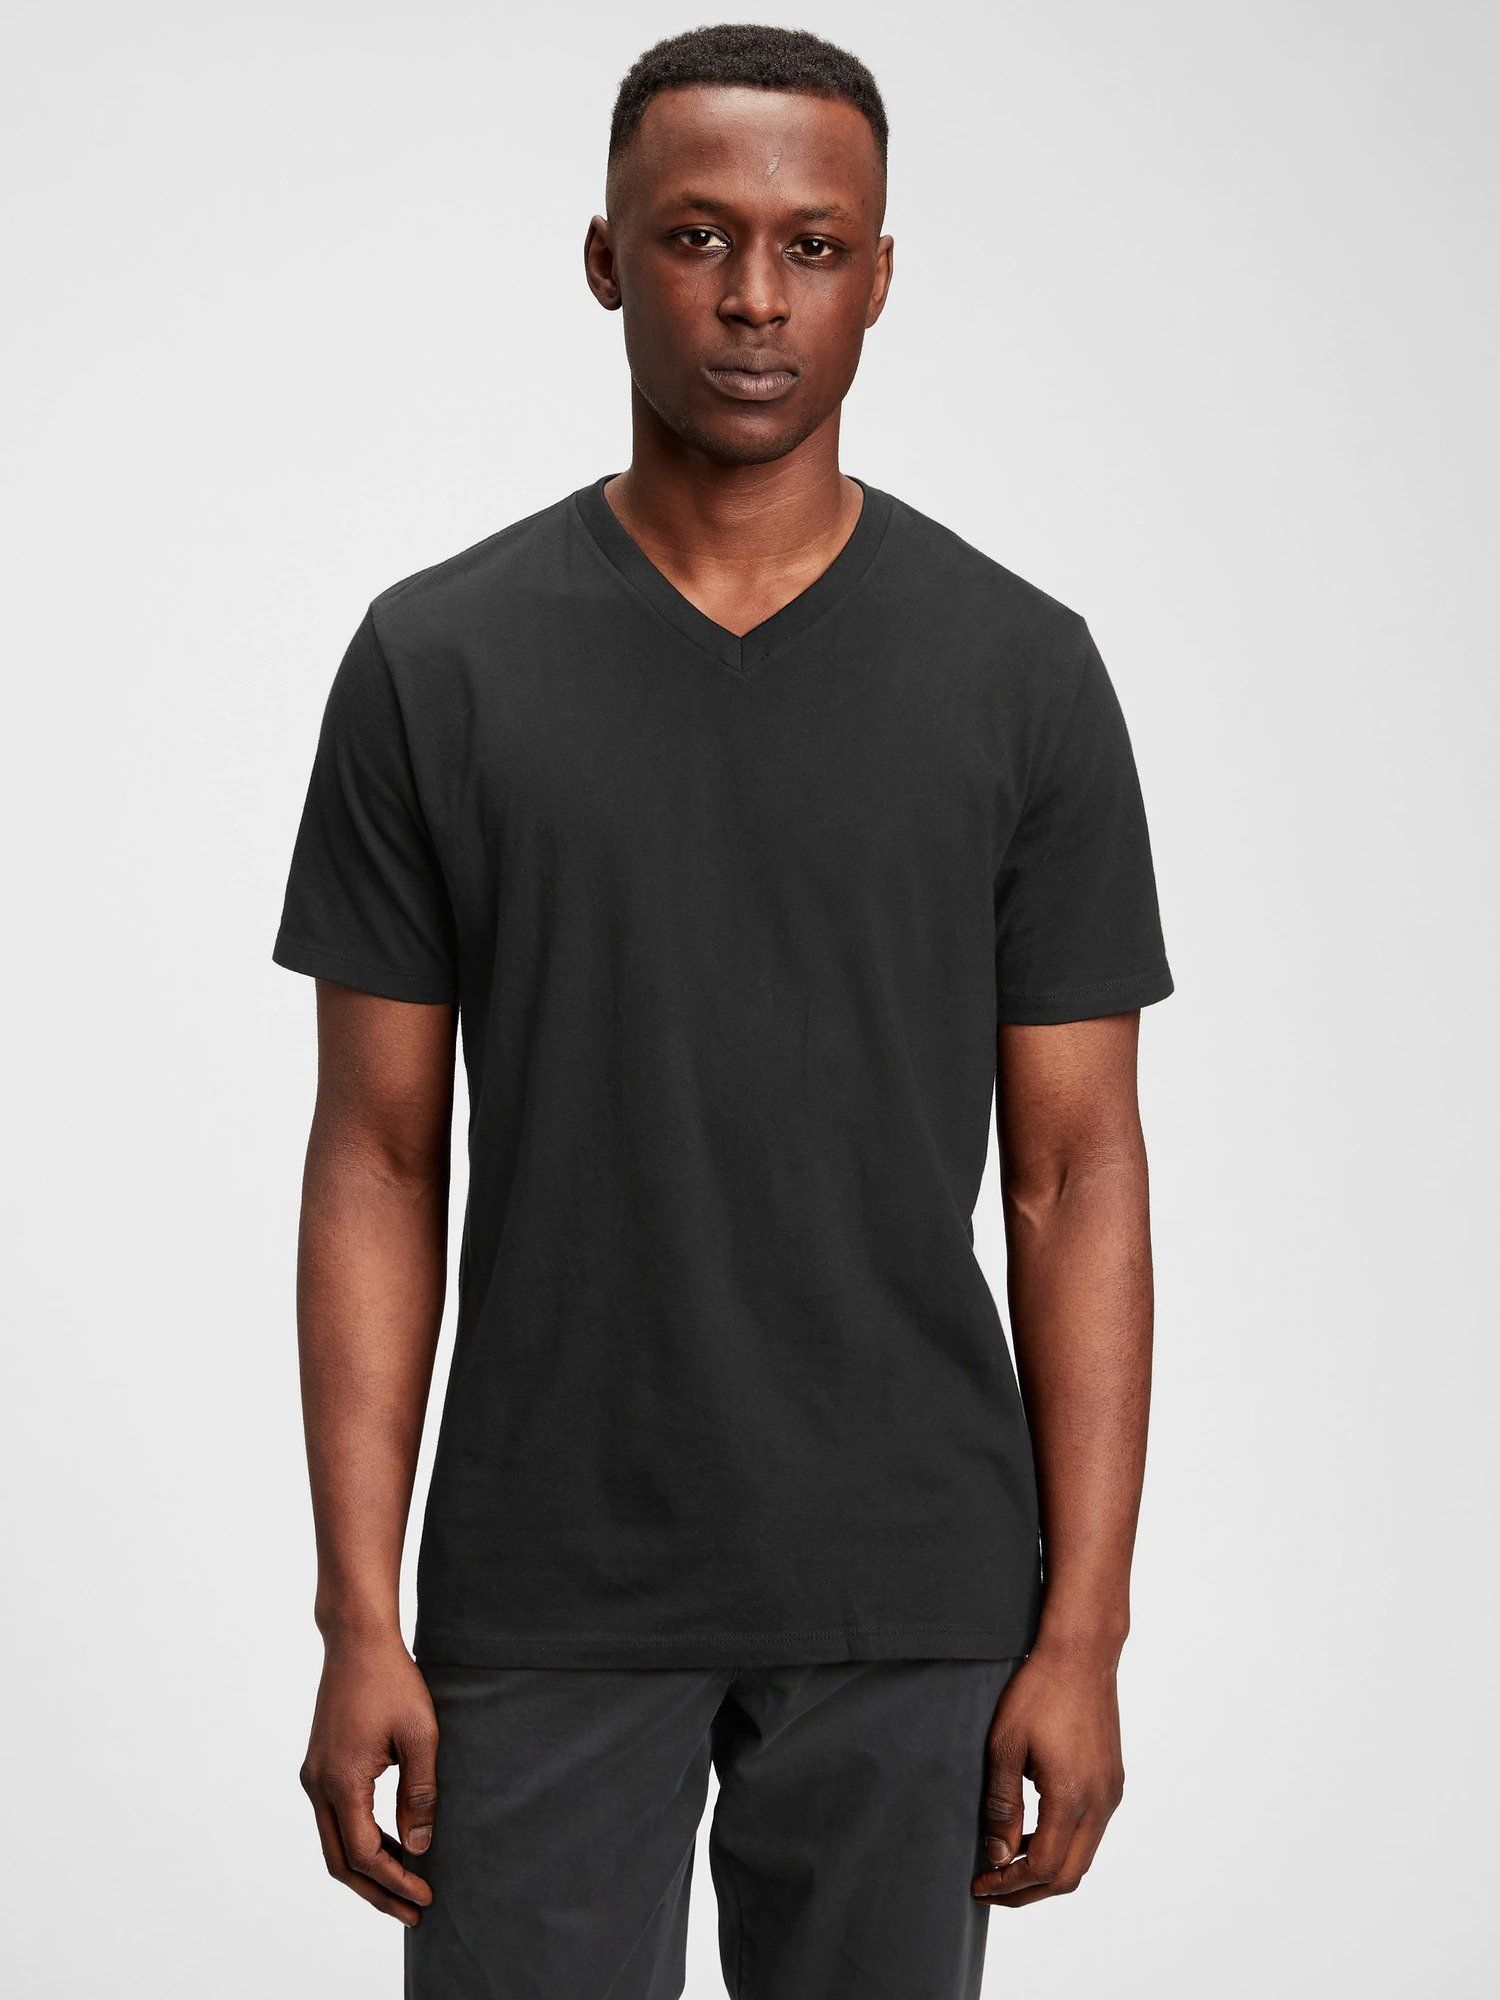 13 Very Best Black T-Shirts For Men | The Strategist